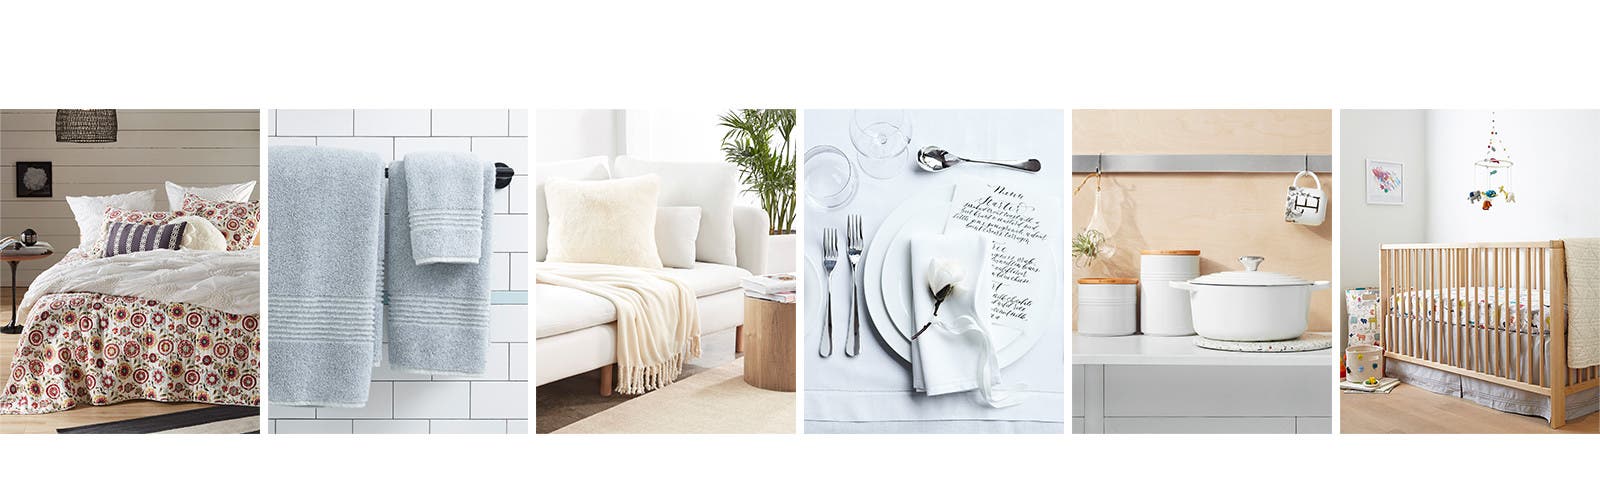 All Home | Nordstrom